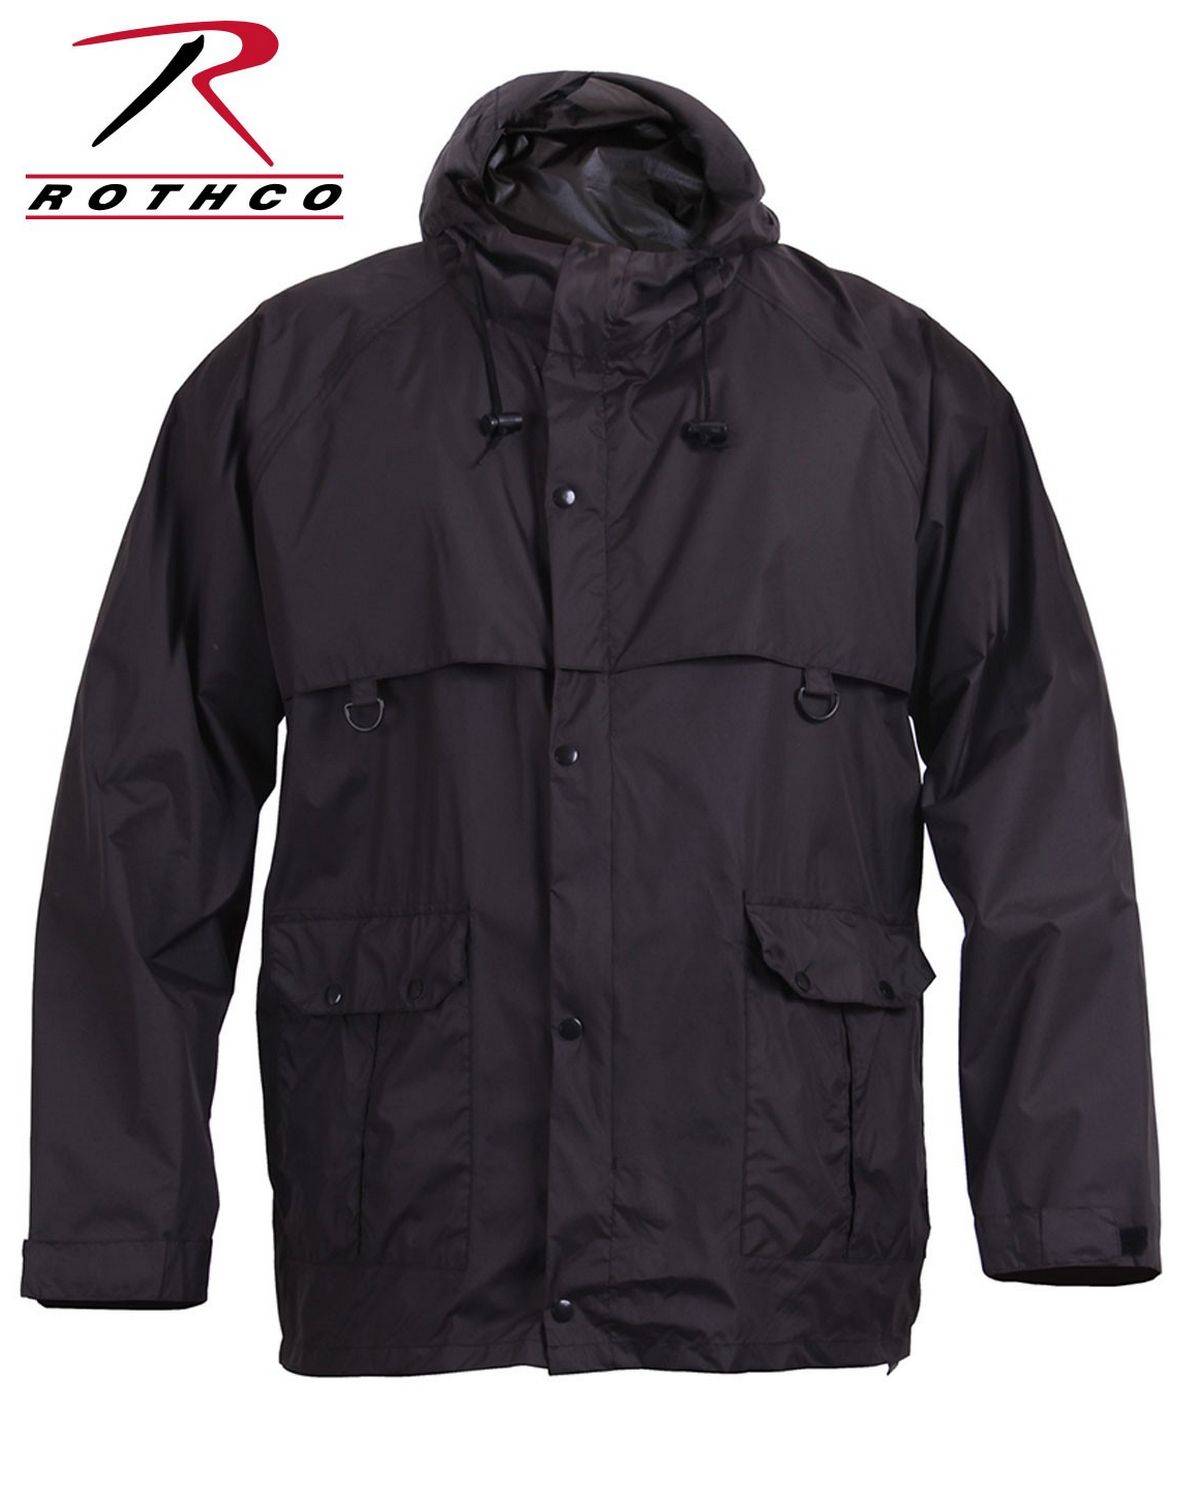 Rothco 30701 Packable Rain Suit - Shop at ApparelnBags.com